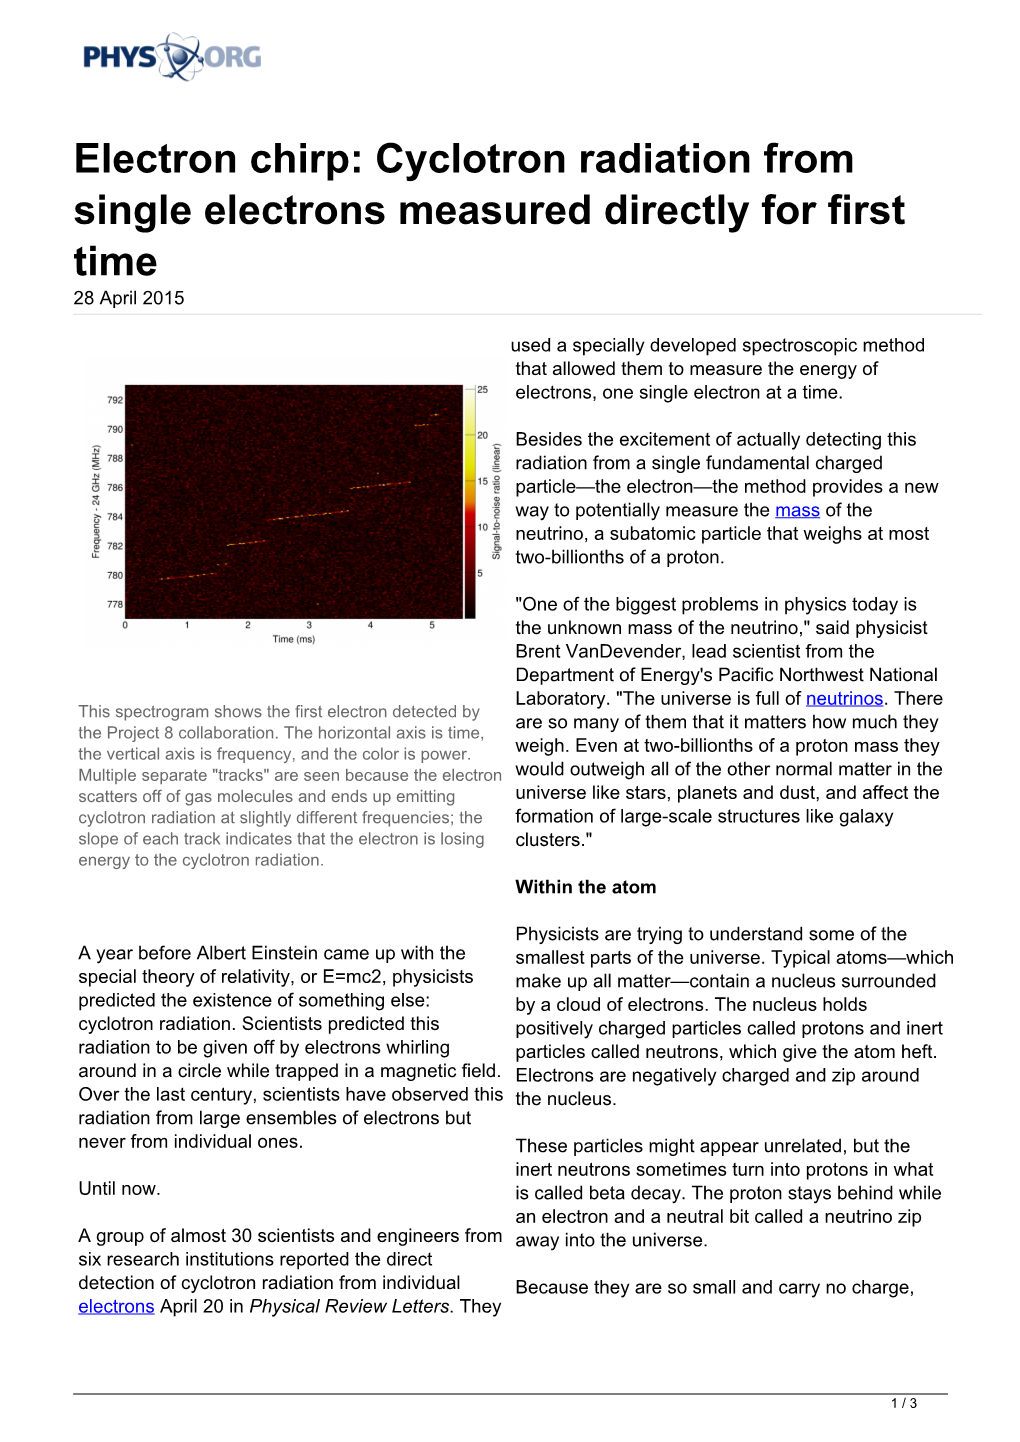 Cyclotron Radiation from Single Electrons Measured Directly for First Time 28 April 2015